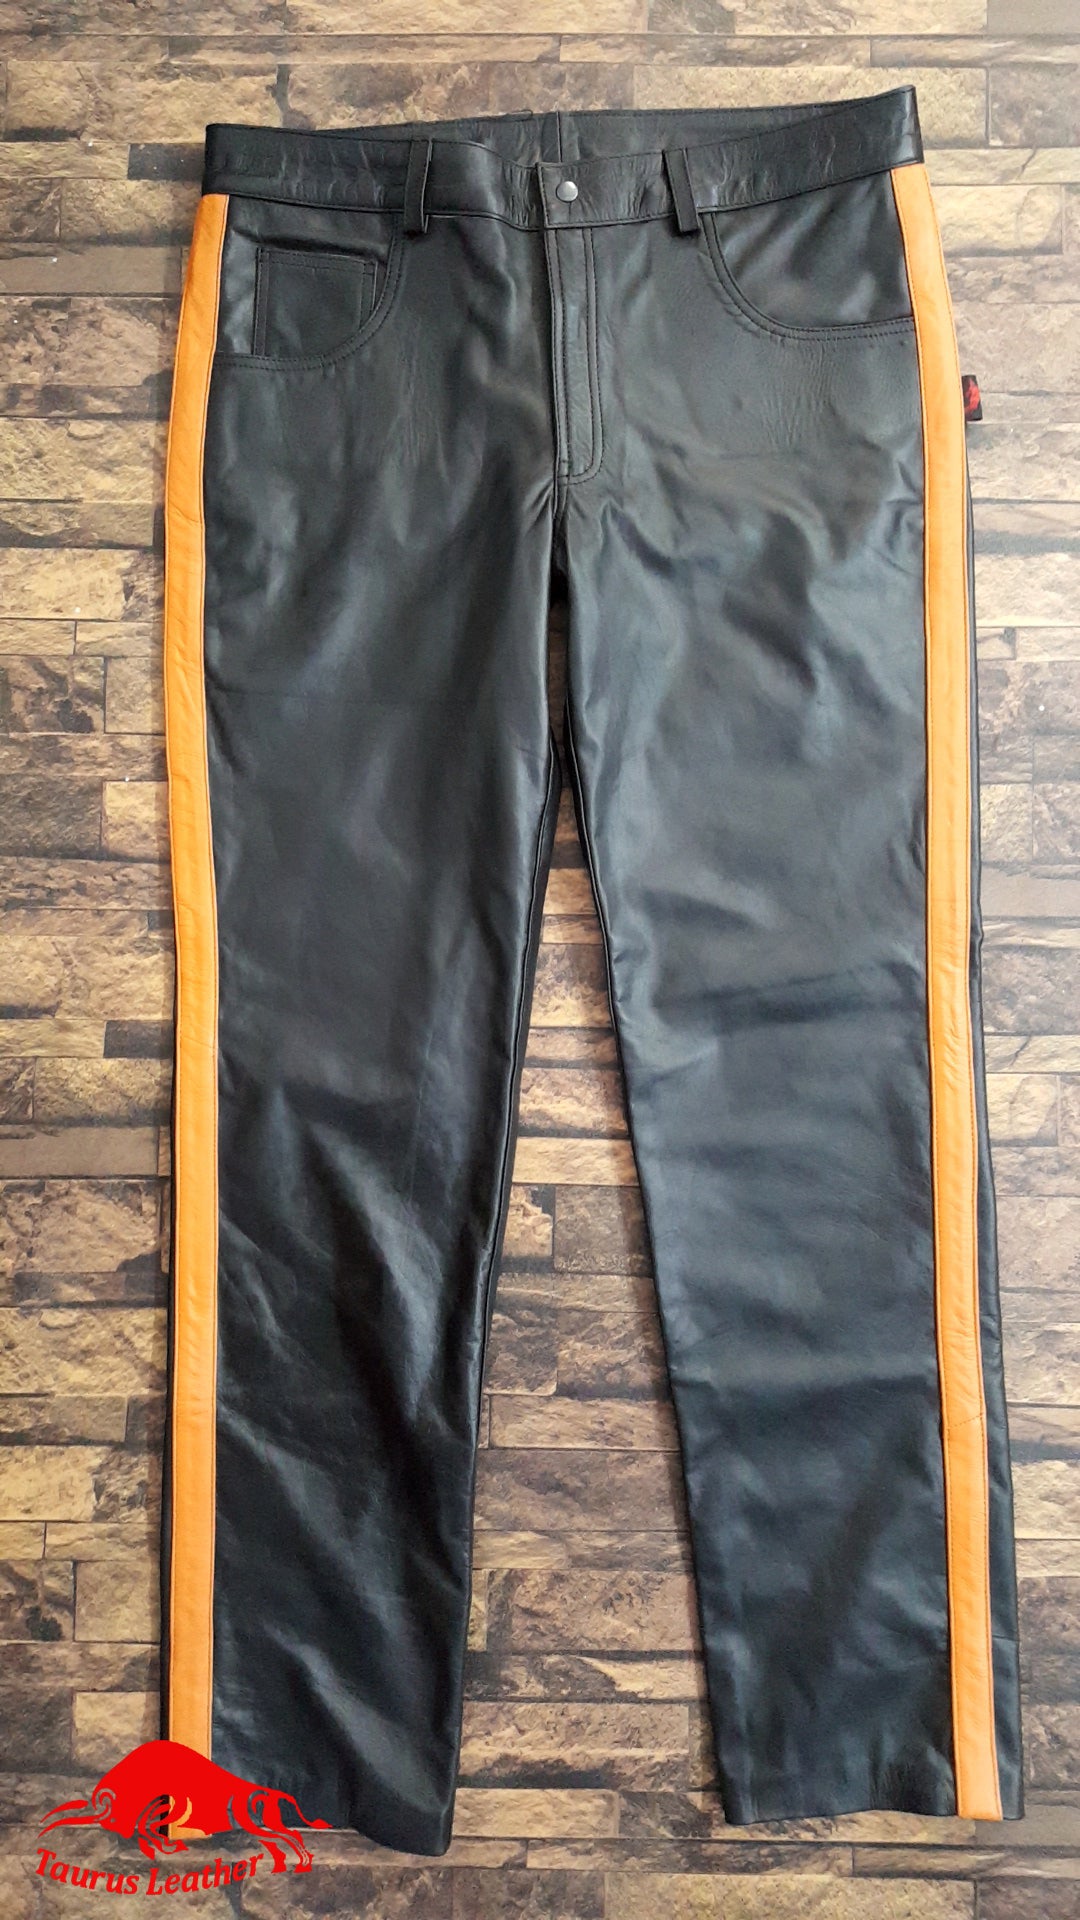 TAURUS LEATHER 501 Cow Leather Pant With Orange Stripes On Both Out Seam